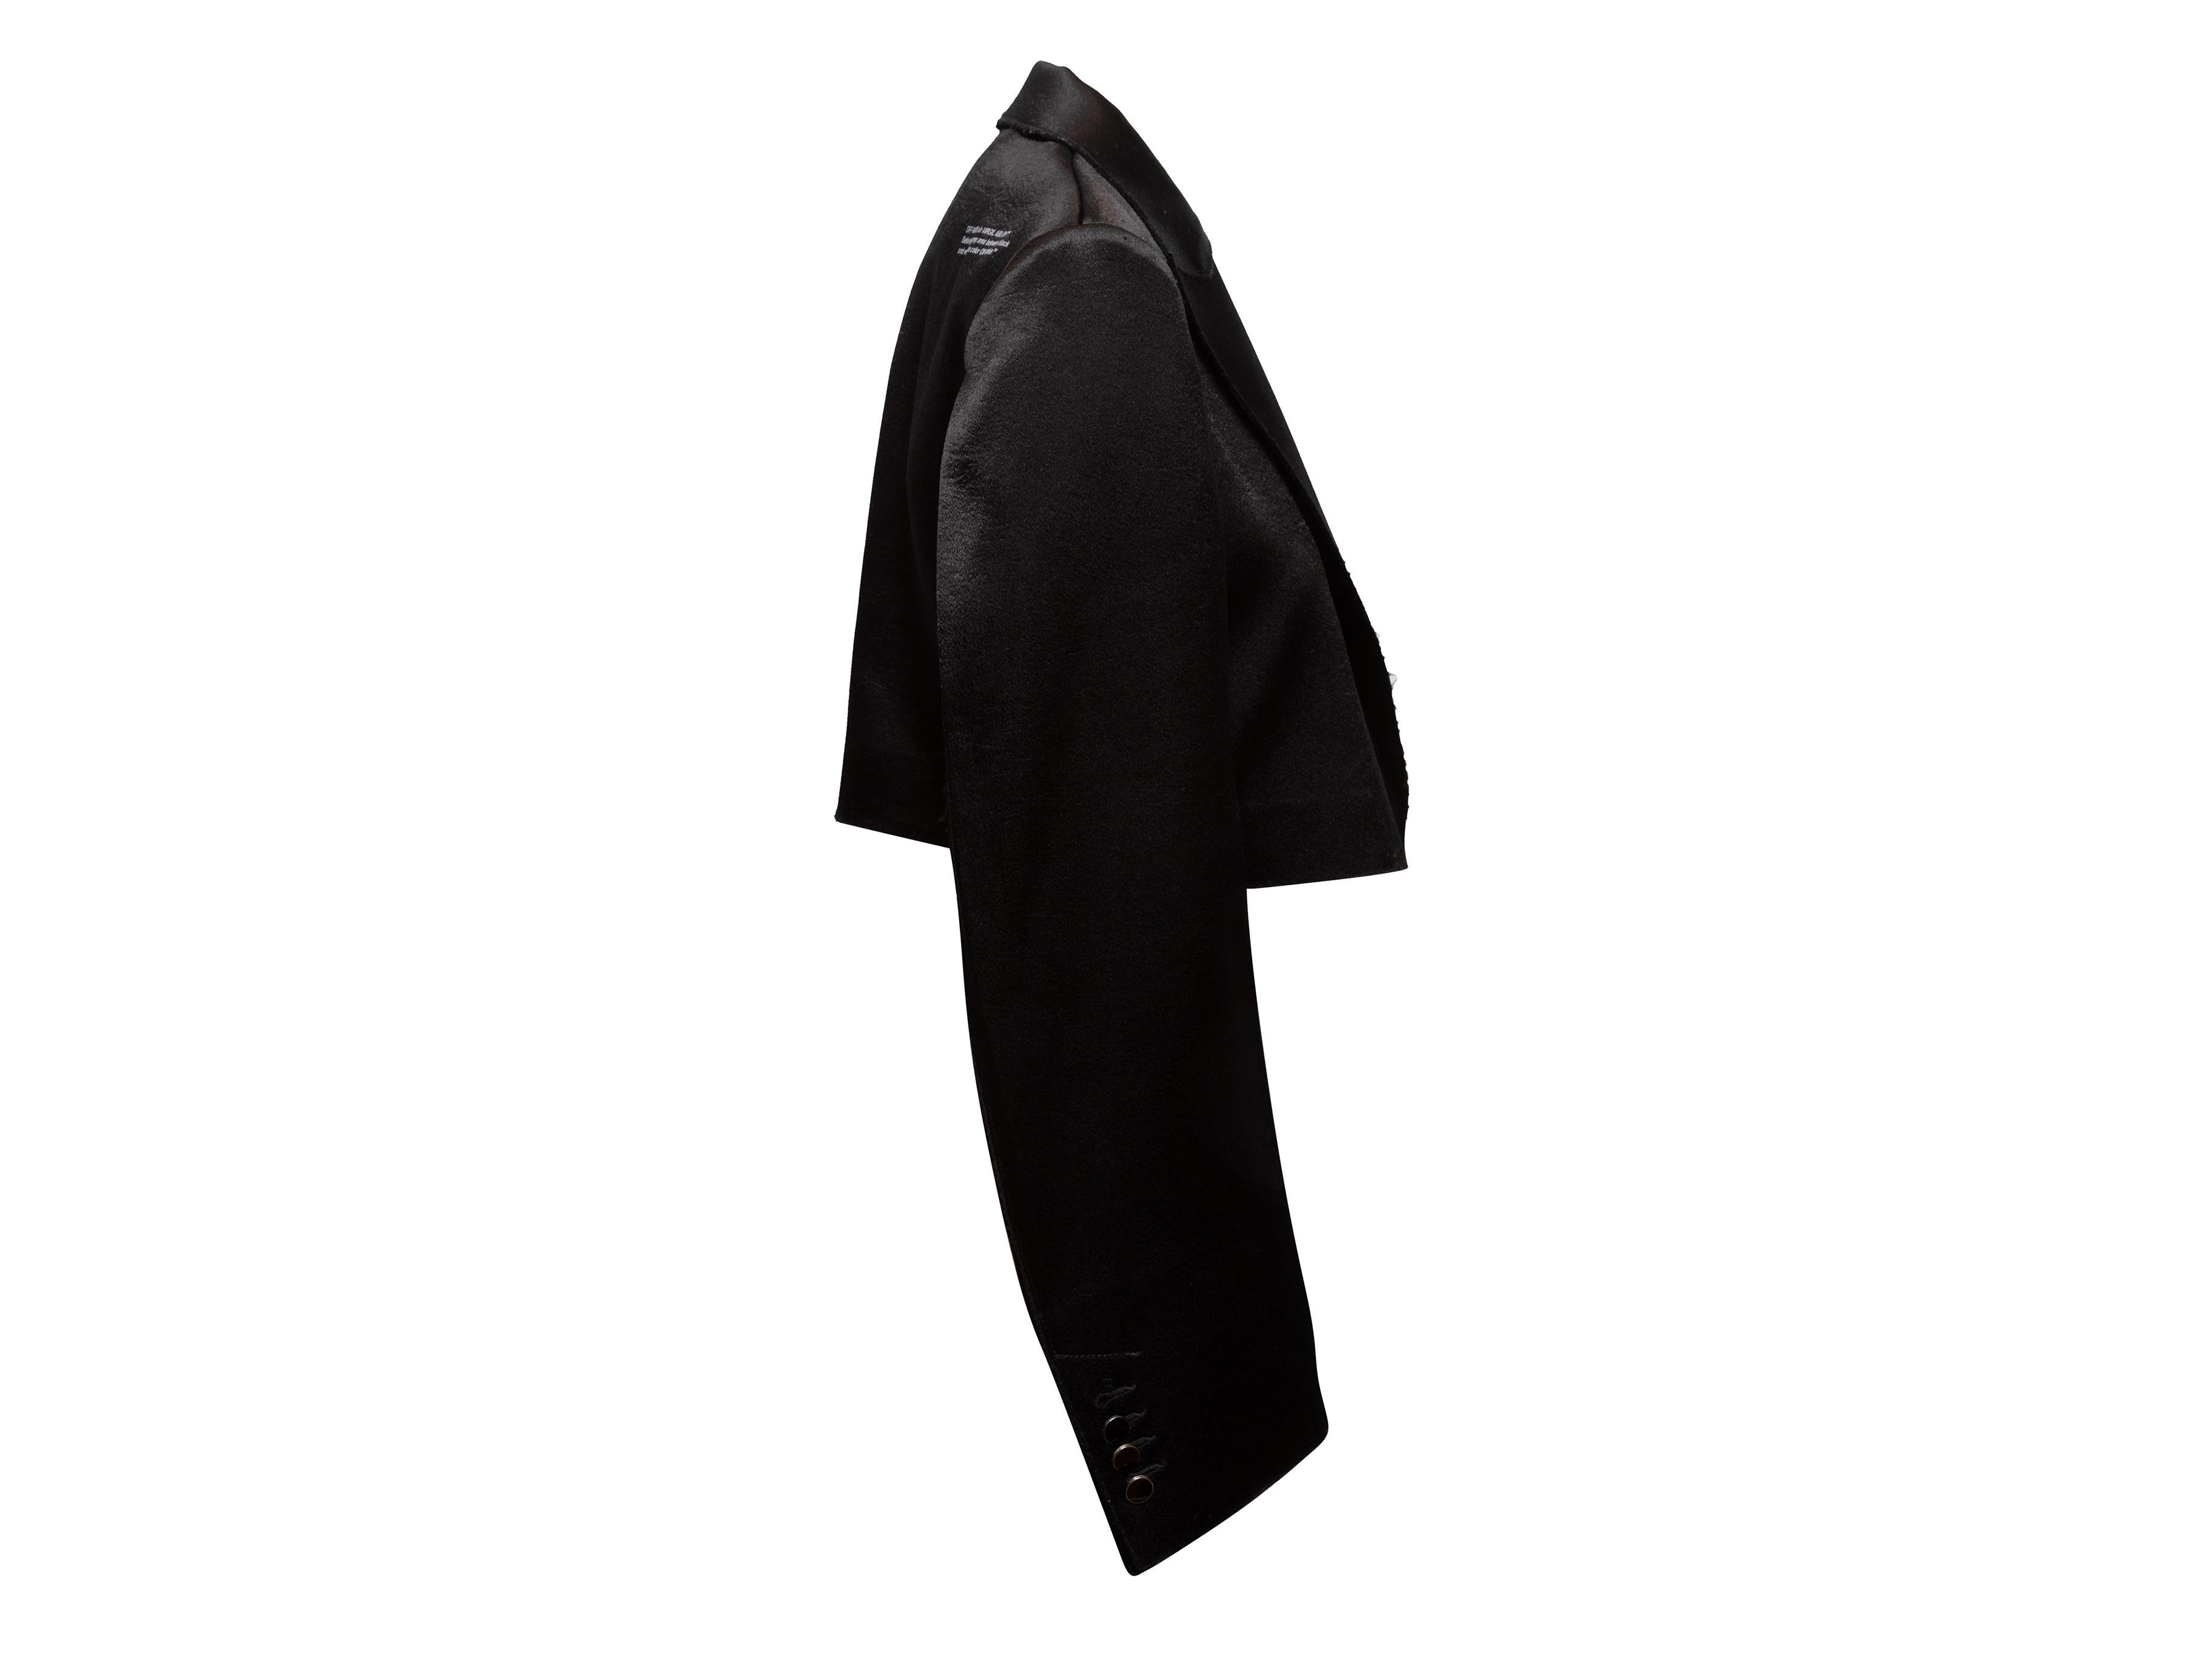 Product Details: Black cropped satin blazer by Off-White. Circa 2013. Peaked lapel. Single bust pocket. Front concealed closure. 36